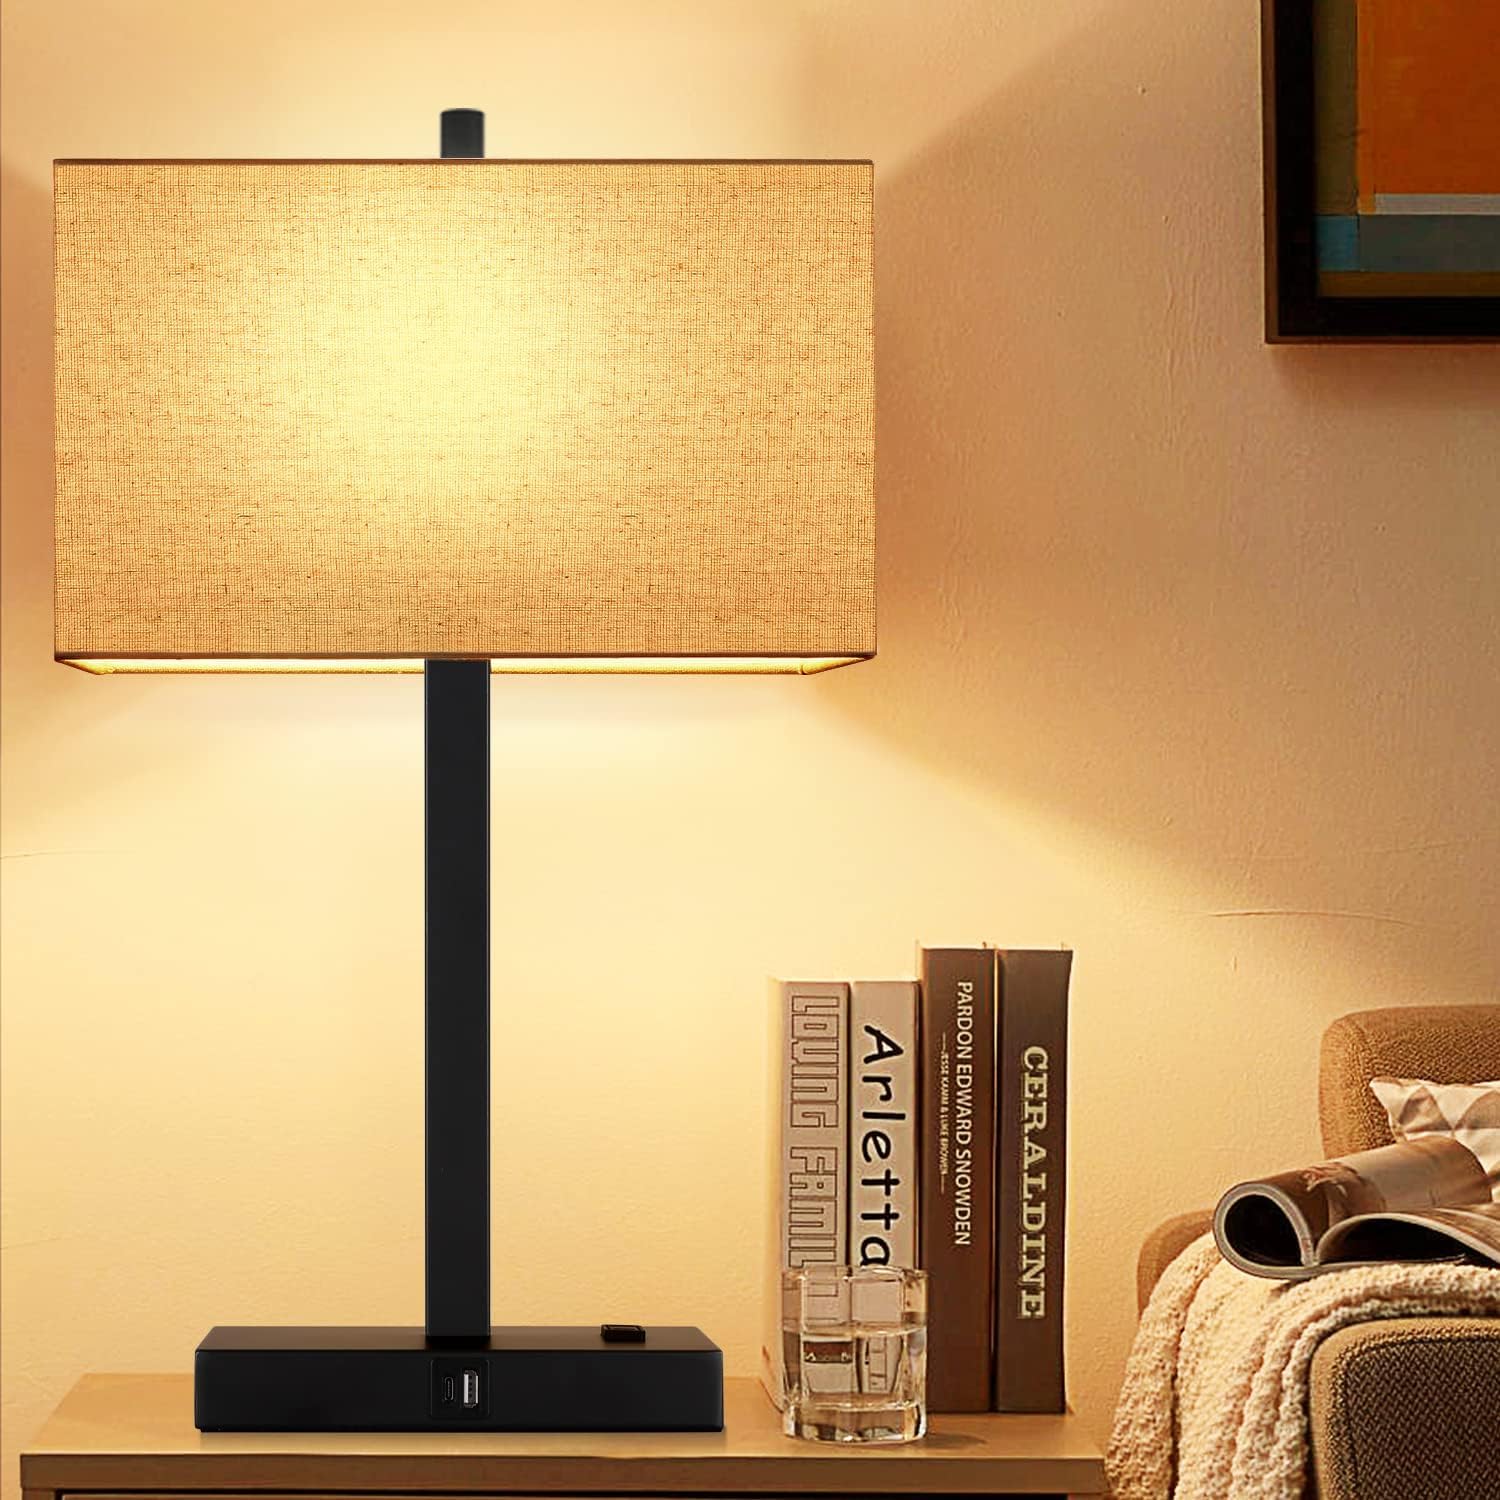 【Upgraded】Set of 2 Bedside Touch Control Table Lamp with USB A+C Charging Ports & AC Outlet, 3-Way Dimmable Nightstand Lamp with Fabric Shade for Bedroom Living Room, 2700K LED Bulbs Included